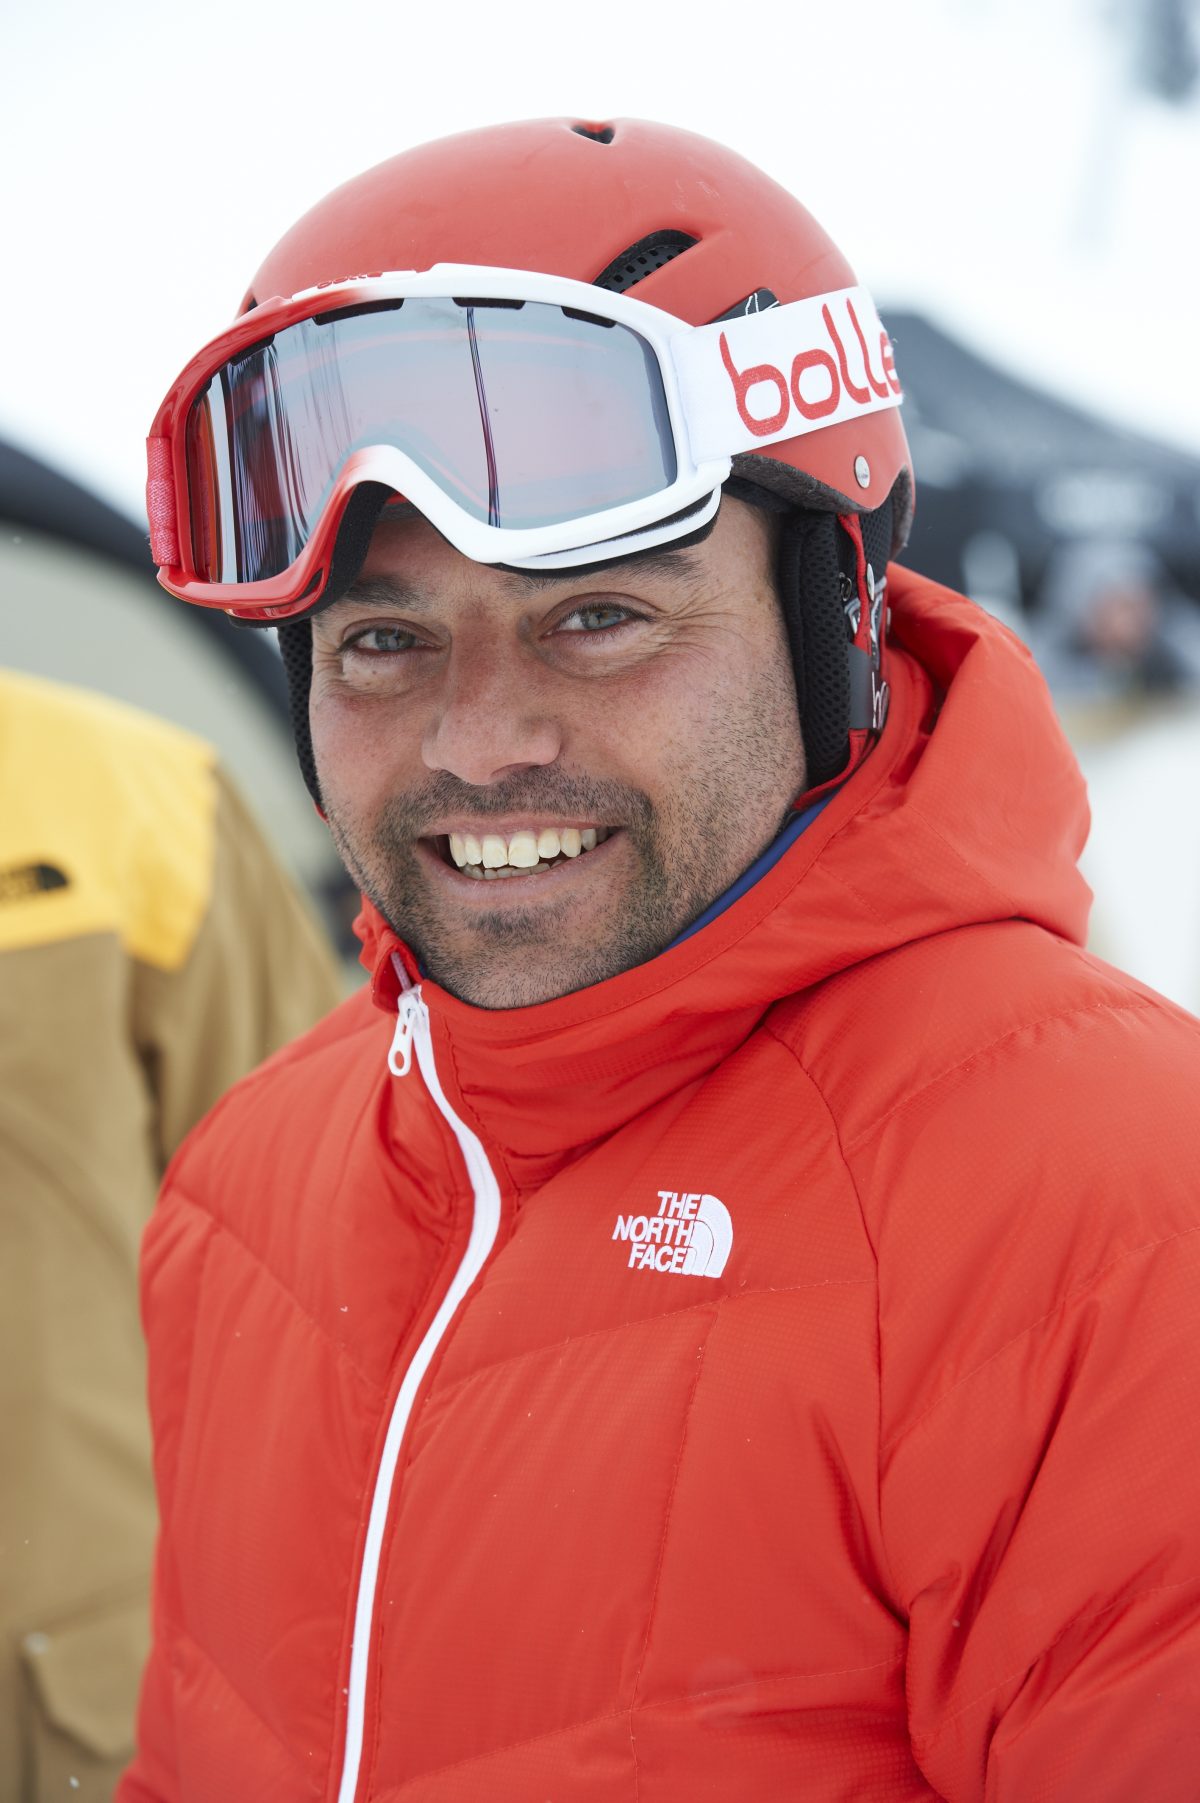 Tim Fawke, CEO of Snowsport England. Photo: Snowsport England. National Schools Snowsport Week is Back This Month.